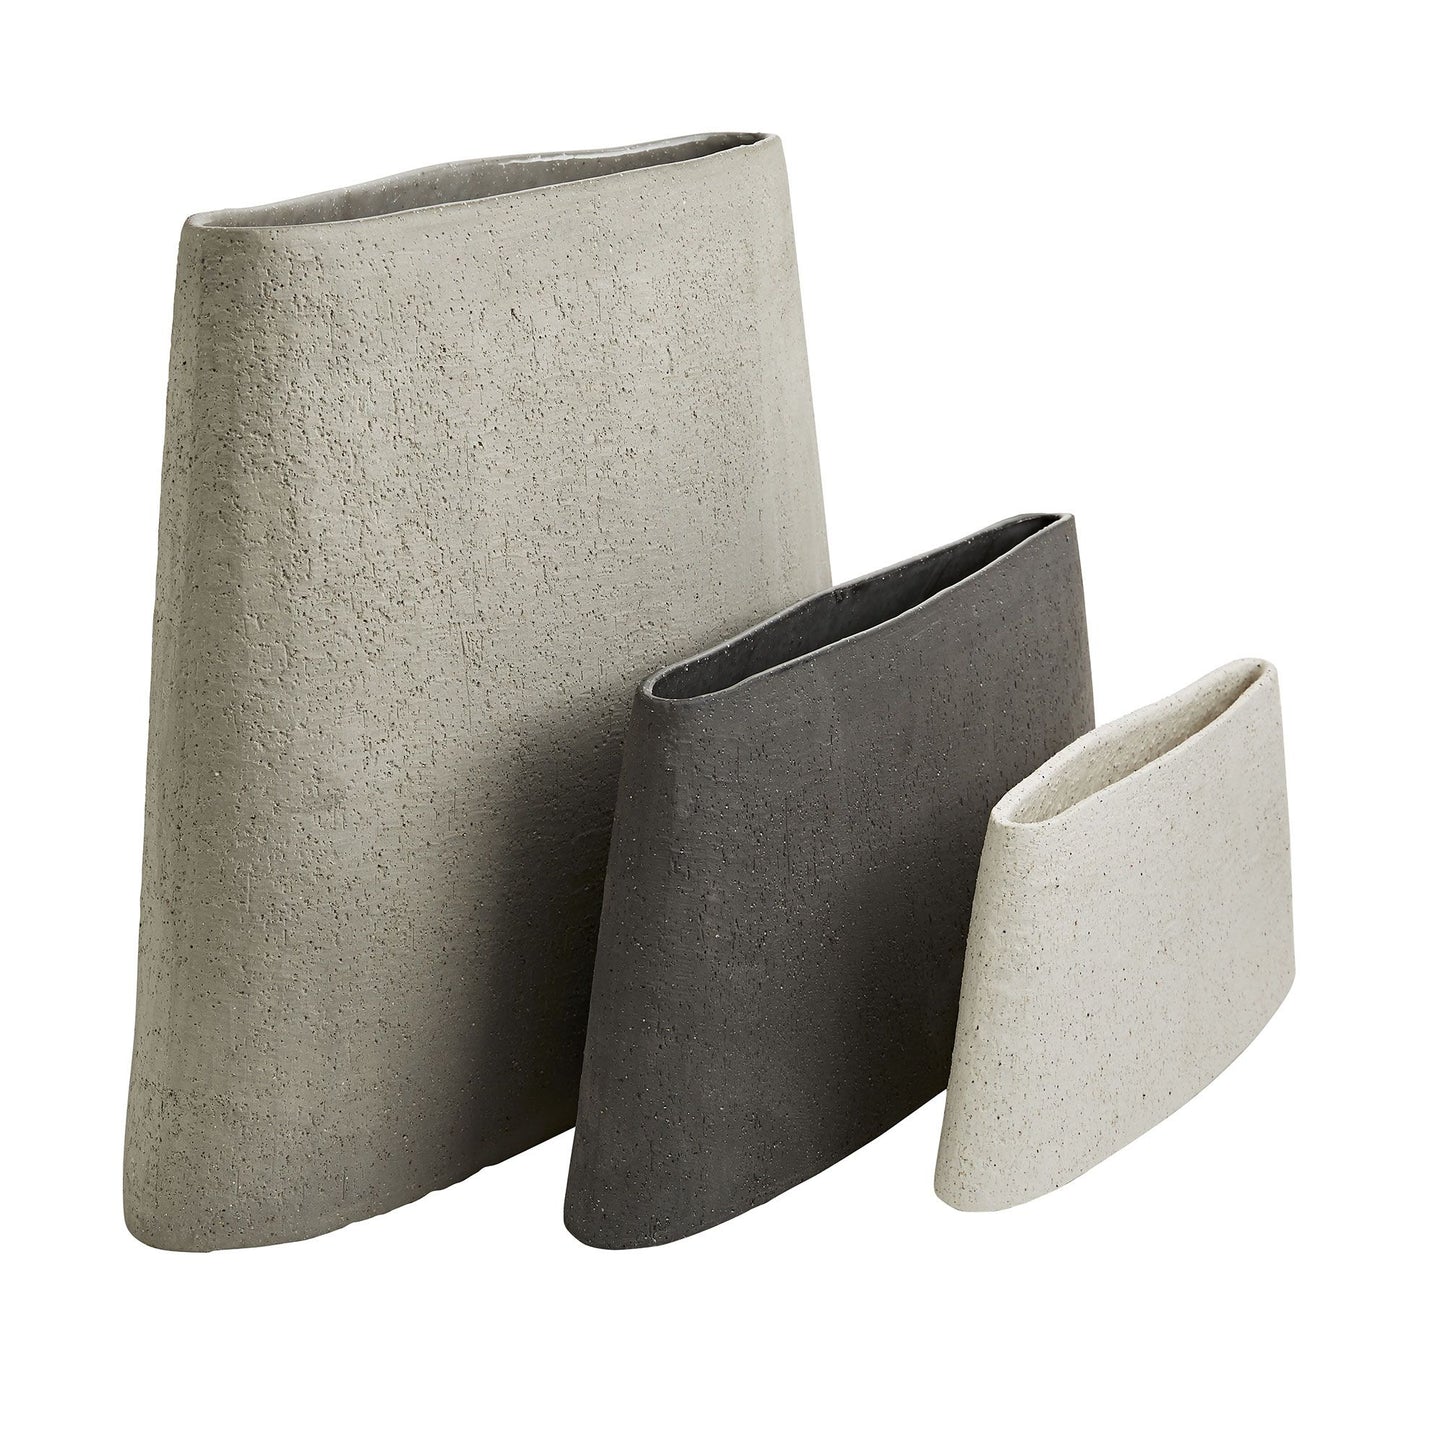 Hasta Vases Ivory Gray and Charcoal